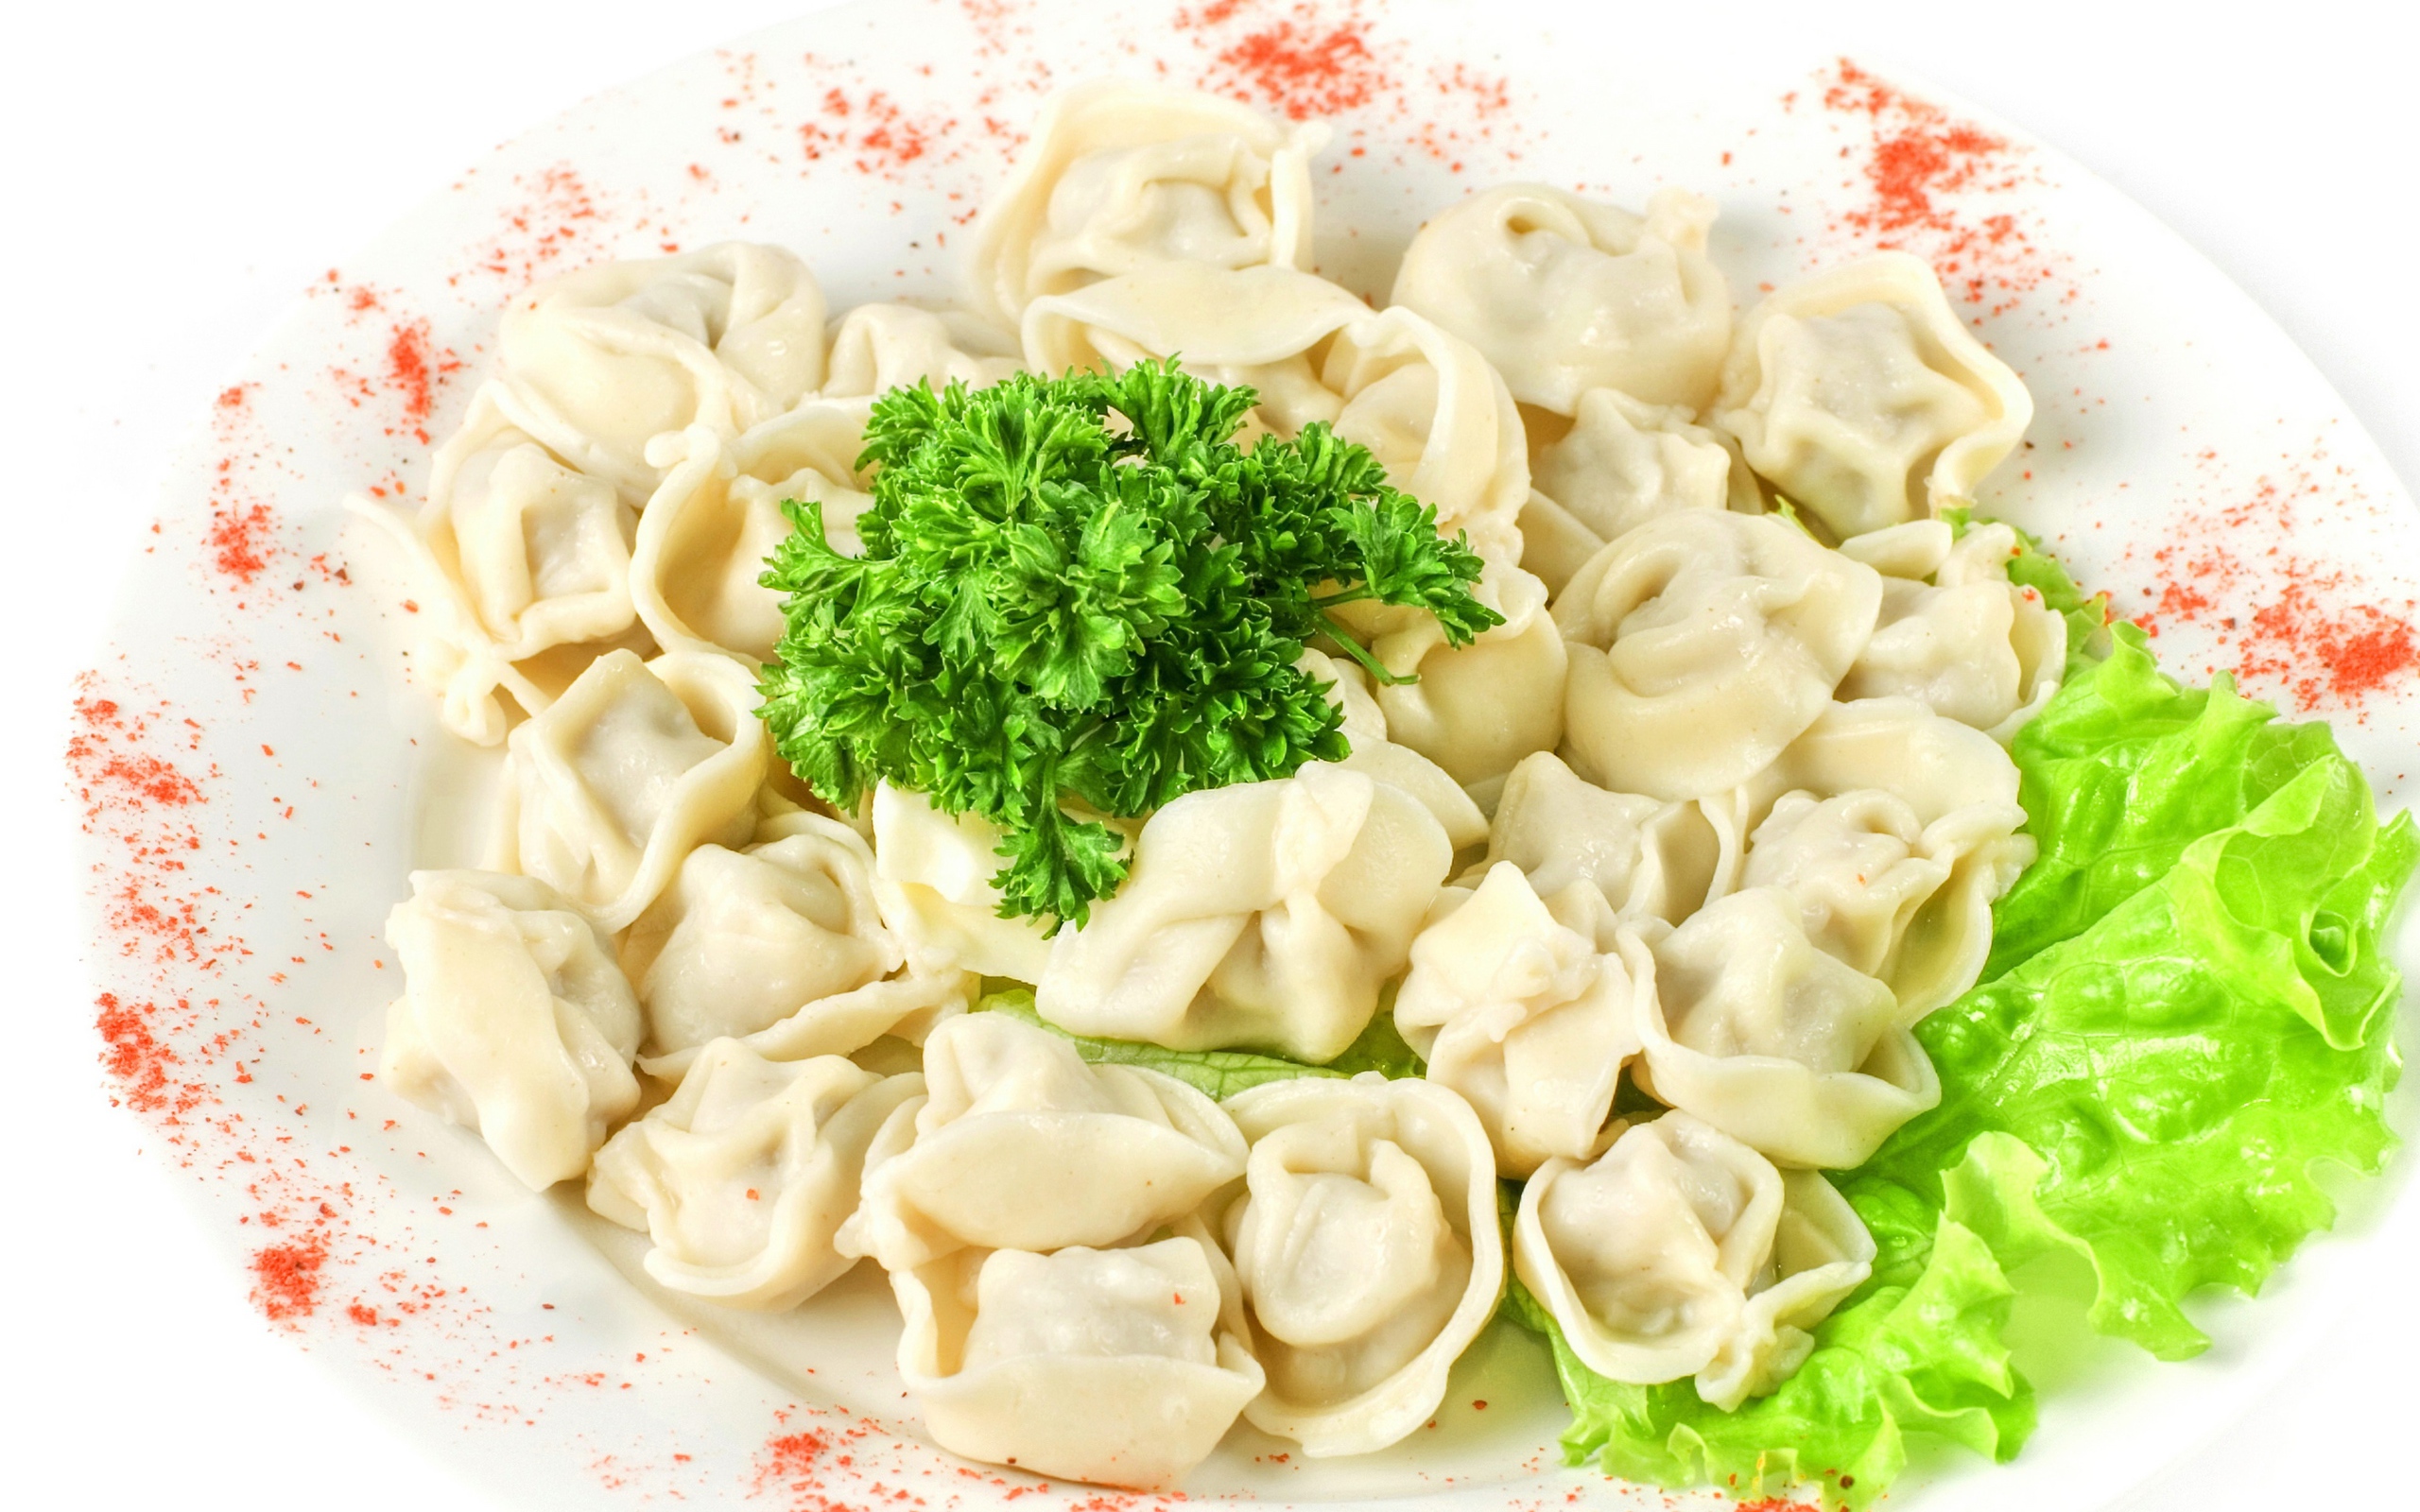 Dumplings with parsley and lettuce on a chili with red pepper